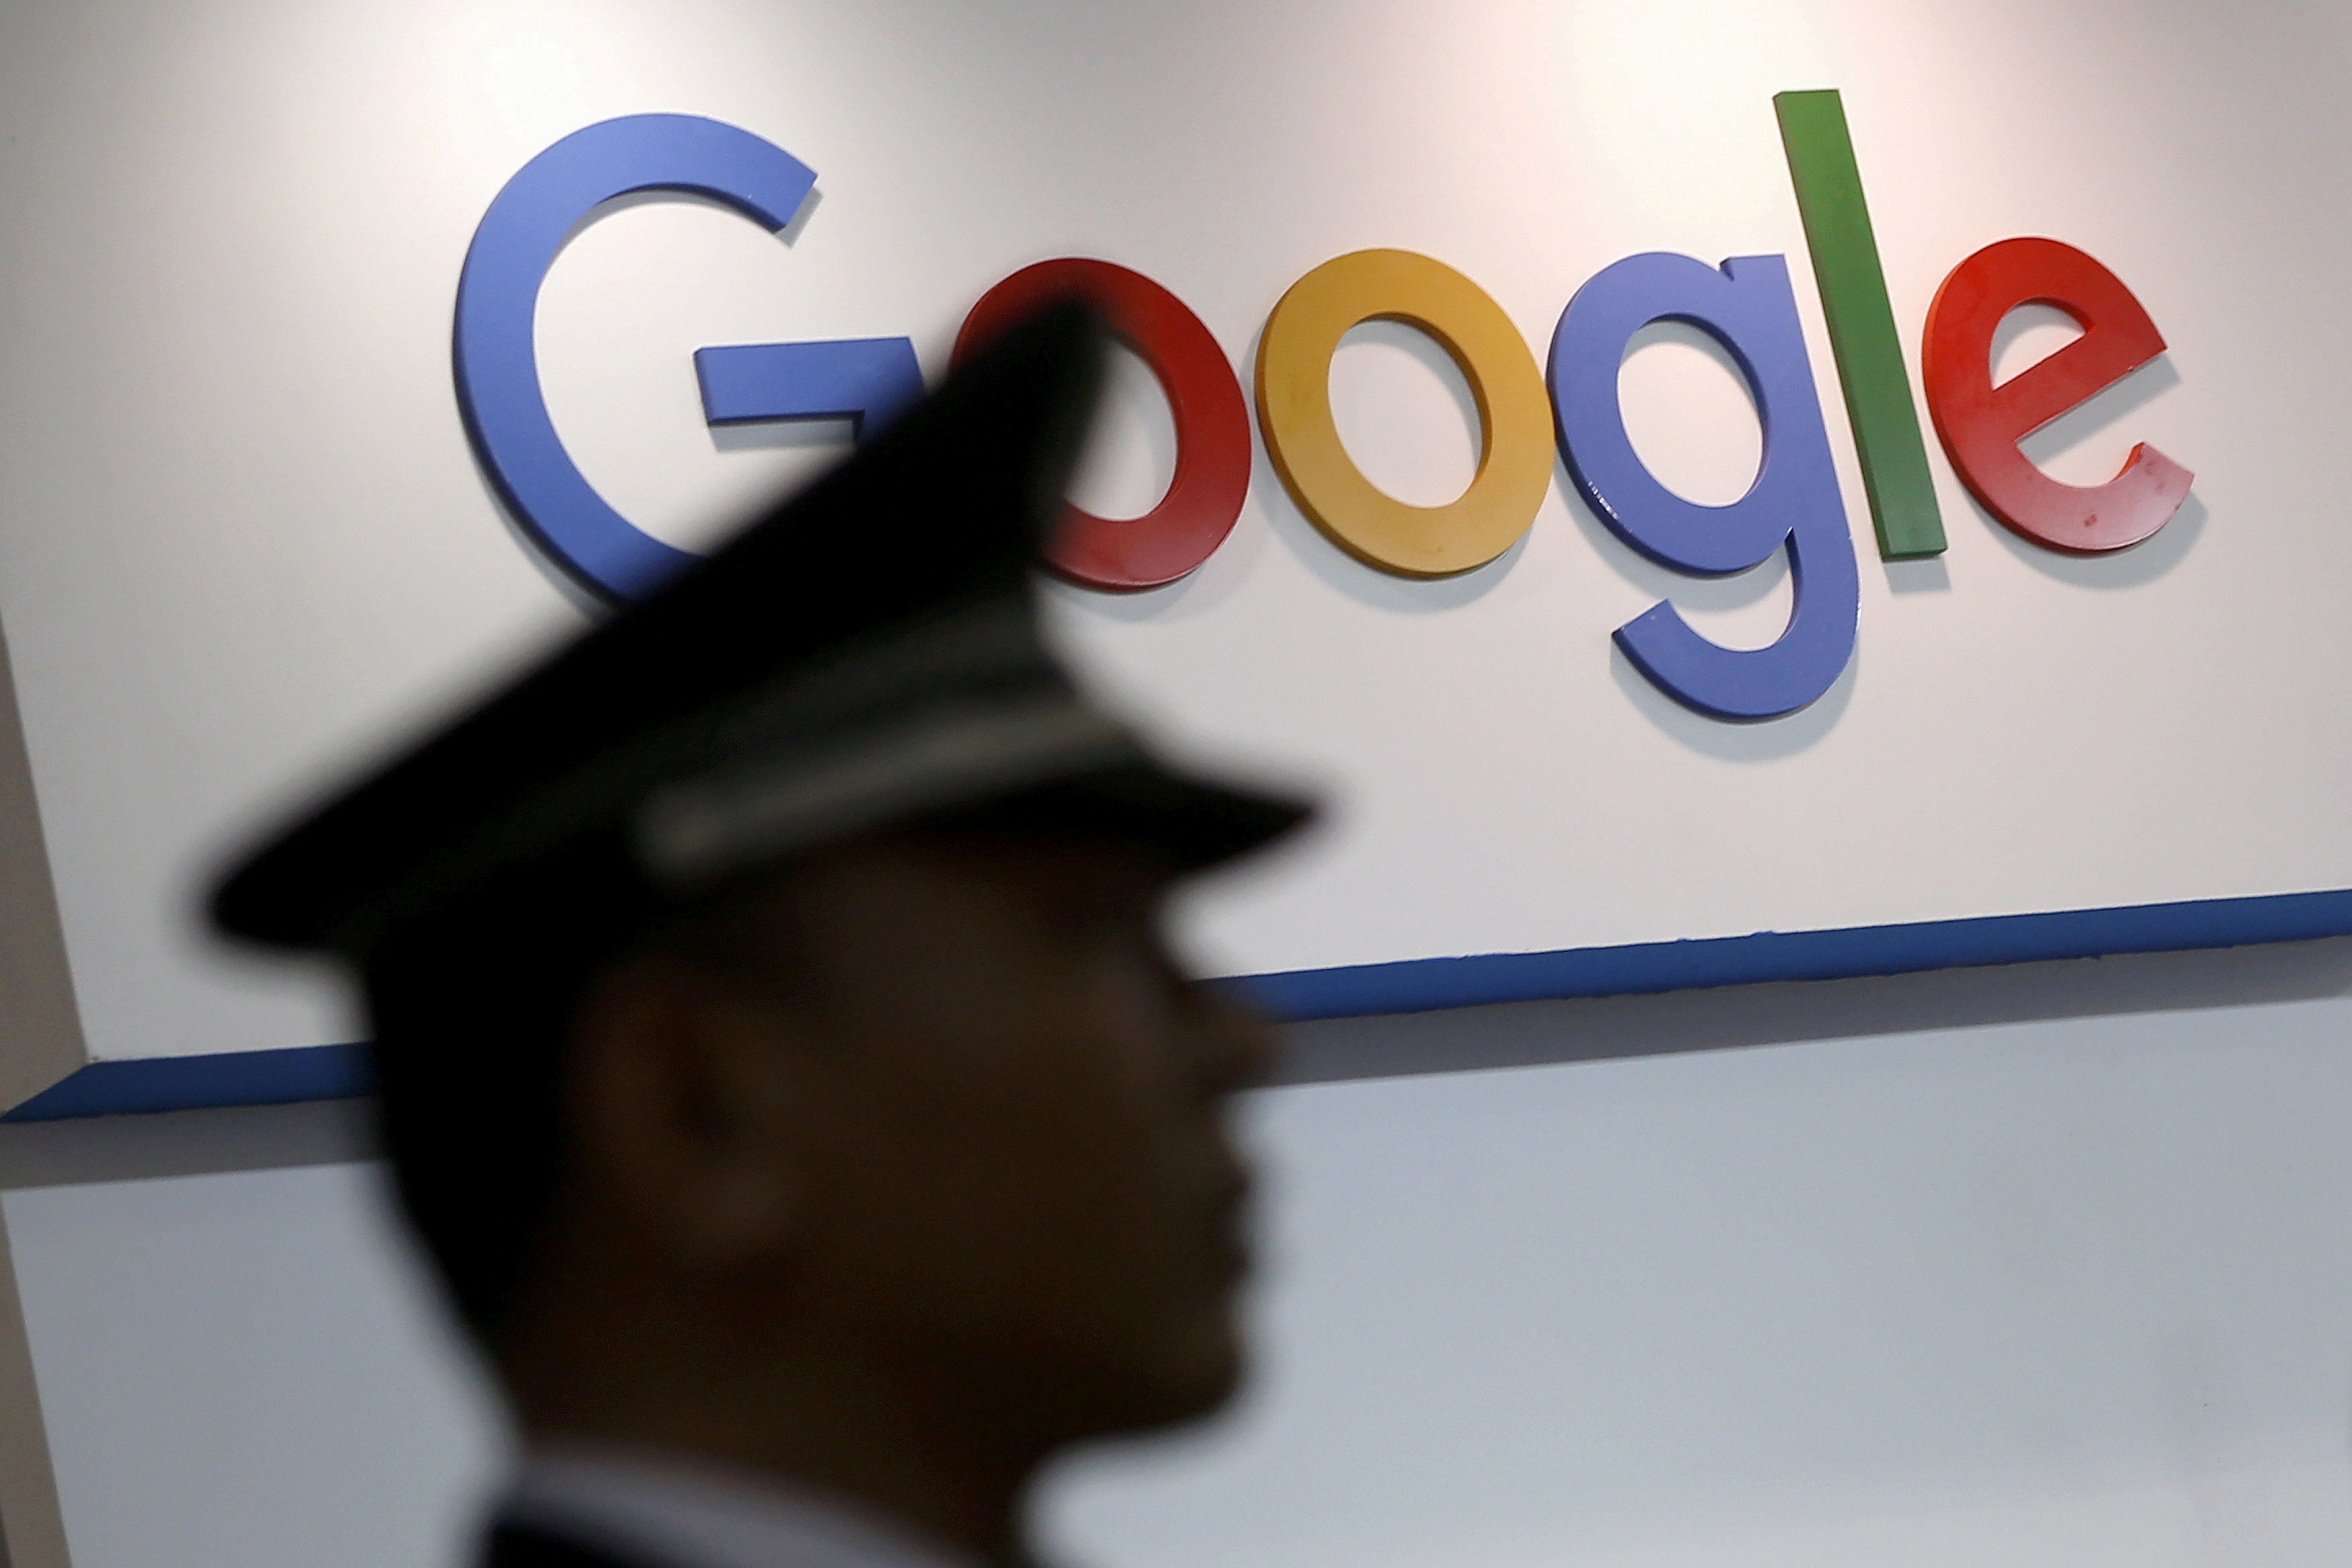 Google plans censored version of search engine in China